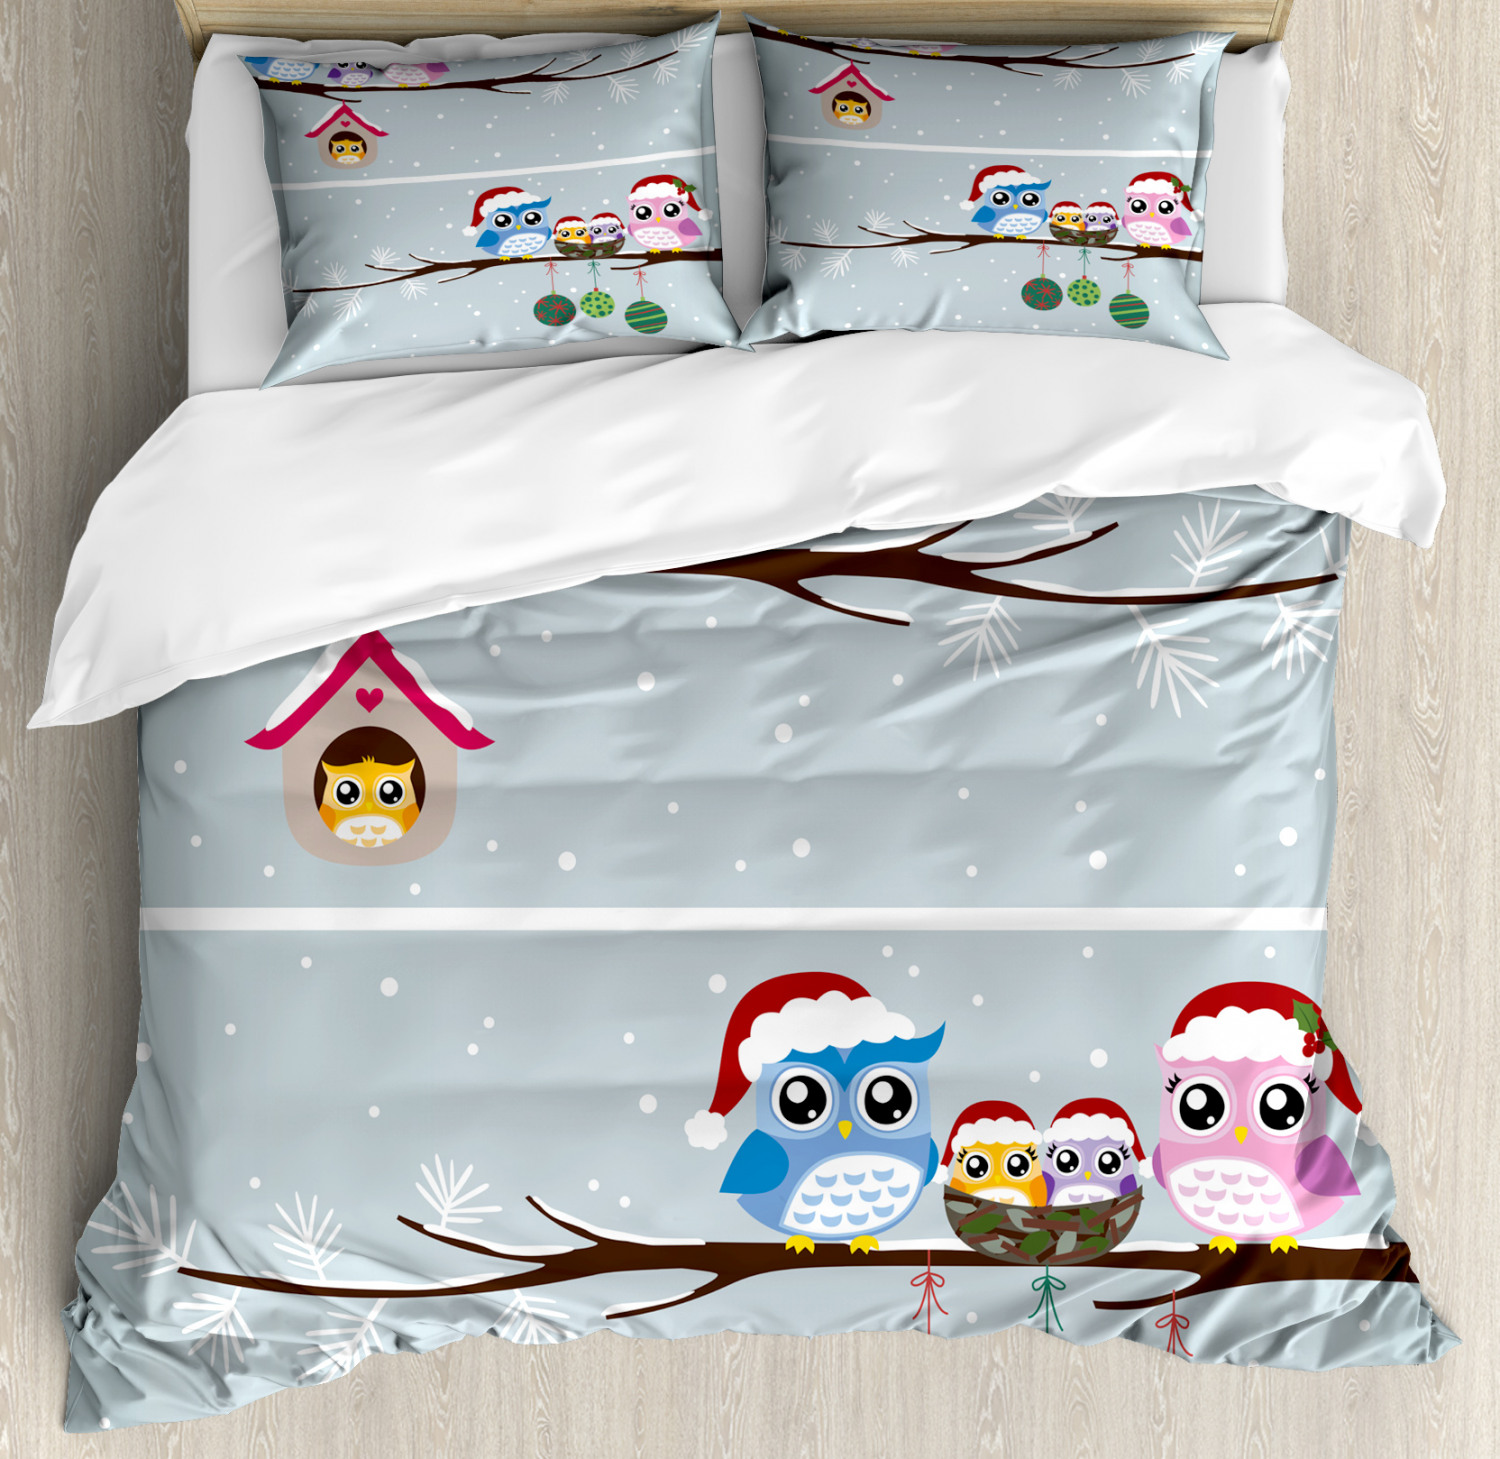 Owl Duvet Cover Set With Pillow Shams Owls With Santa Hats Print